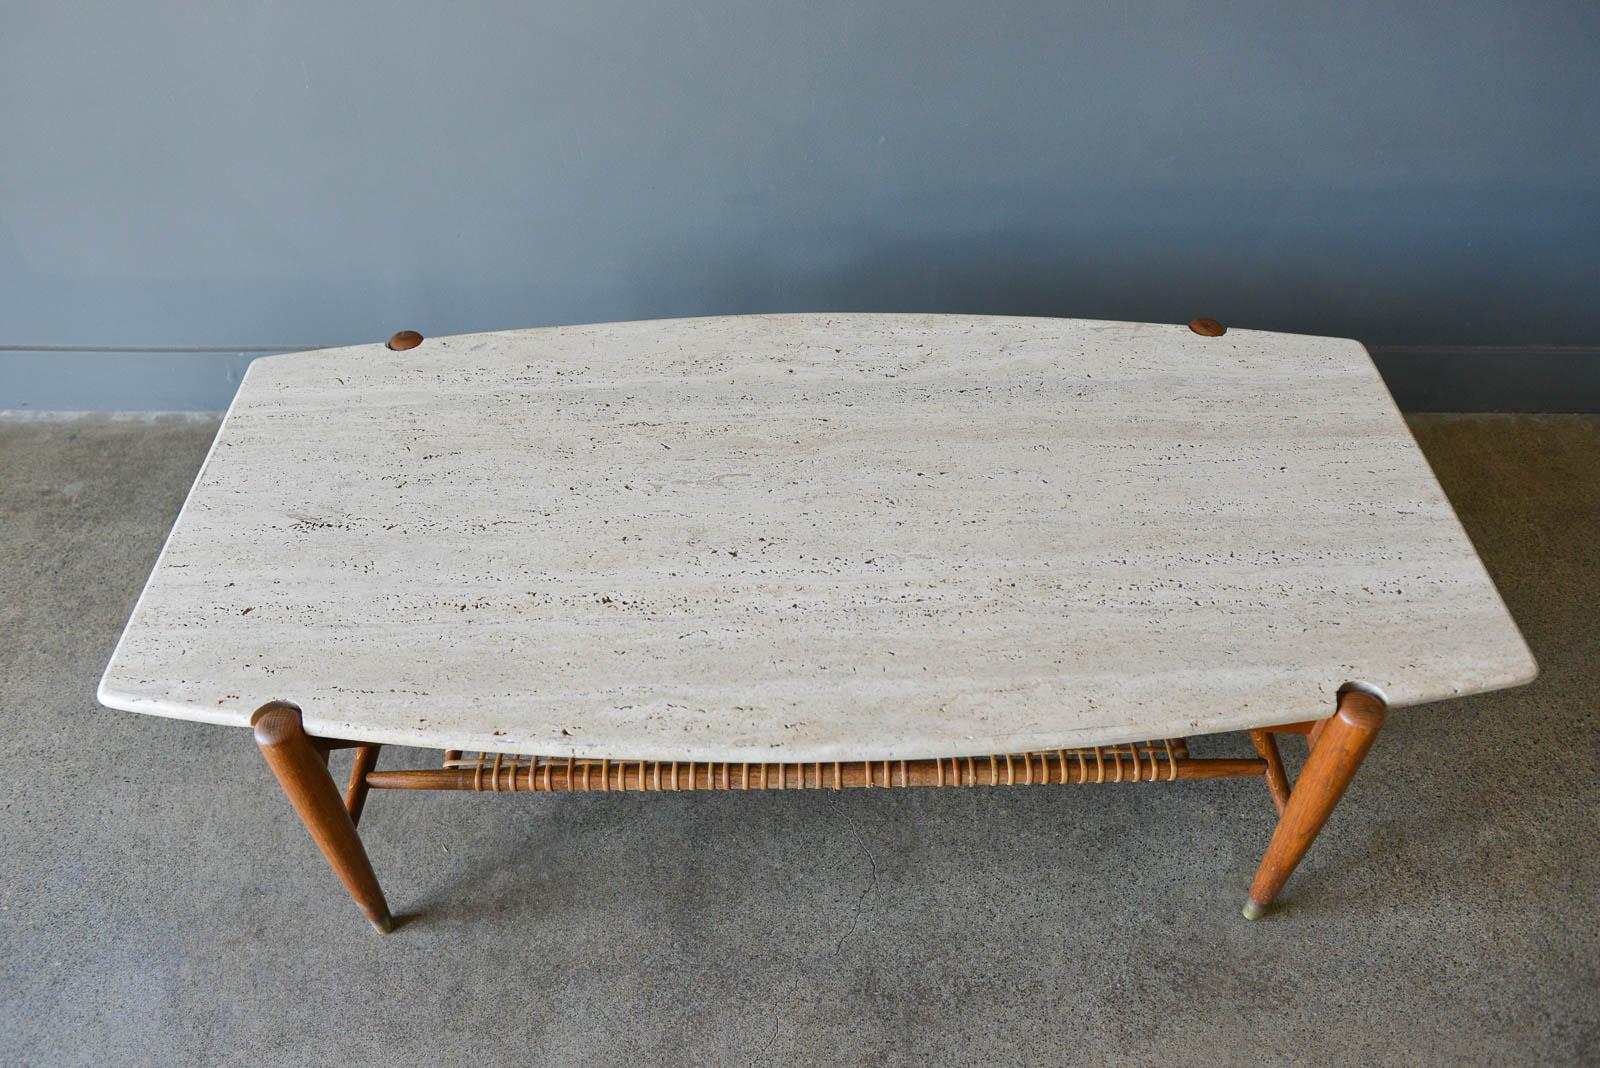 Travertine, oak and cane coffee table by Folke Ohlsson for Dux, circa 1965. Unique surfboard shape with brass tipped legs. Slight wear and some breakage to cane shelf as shown. Travertine is very good with no chips or cracks, slight wear to edges.